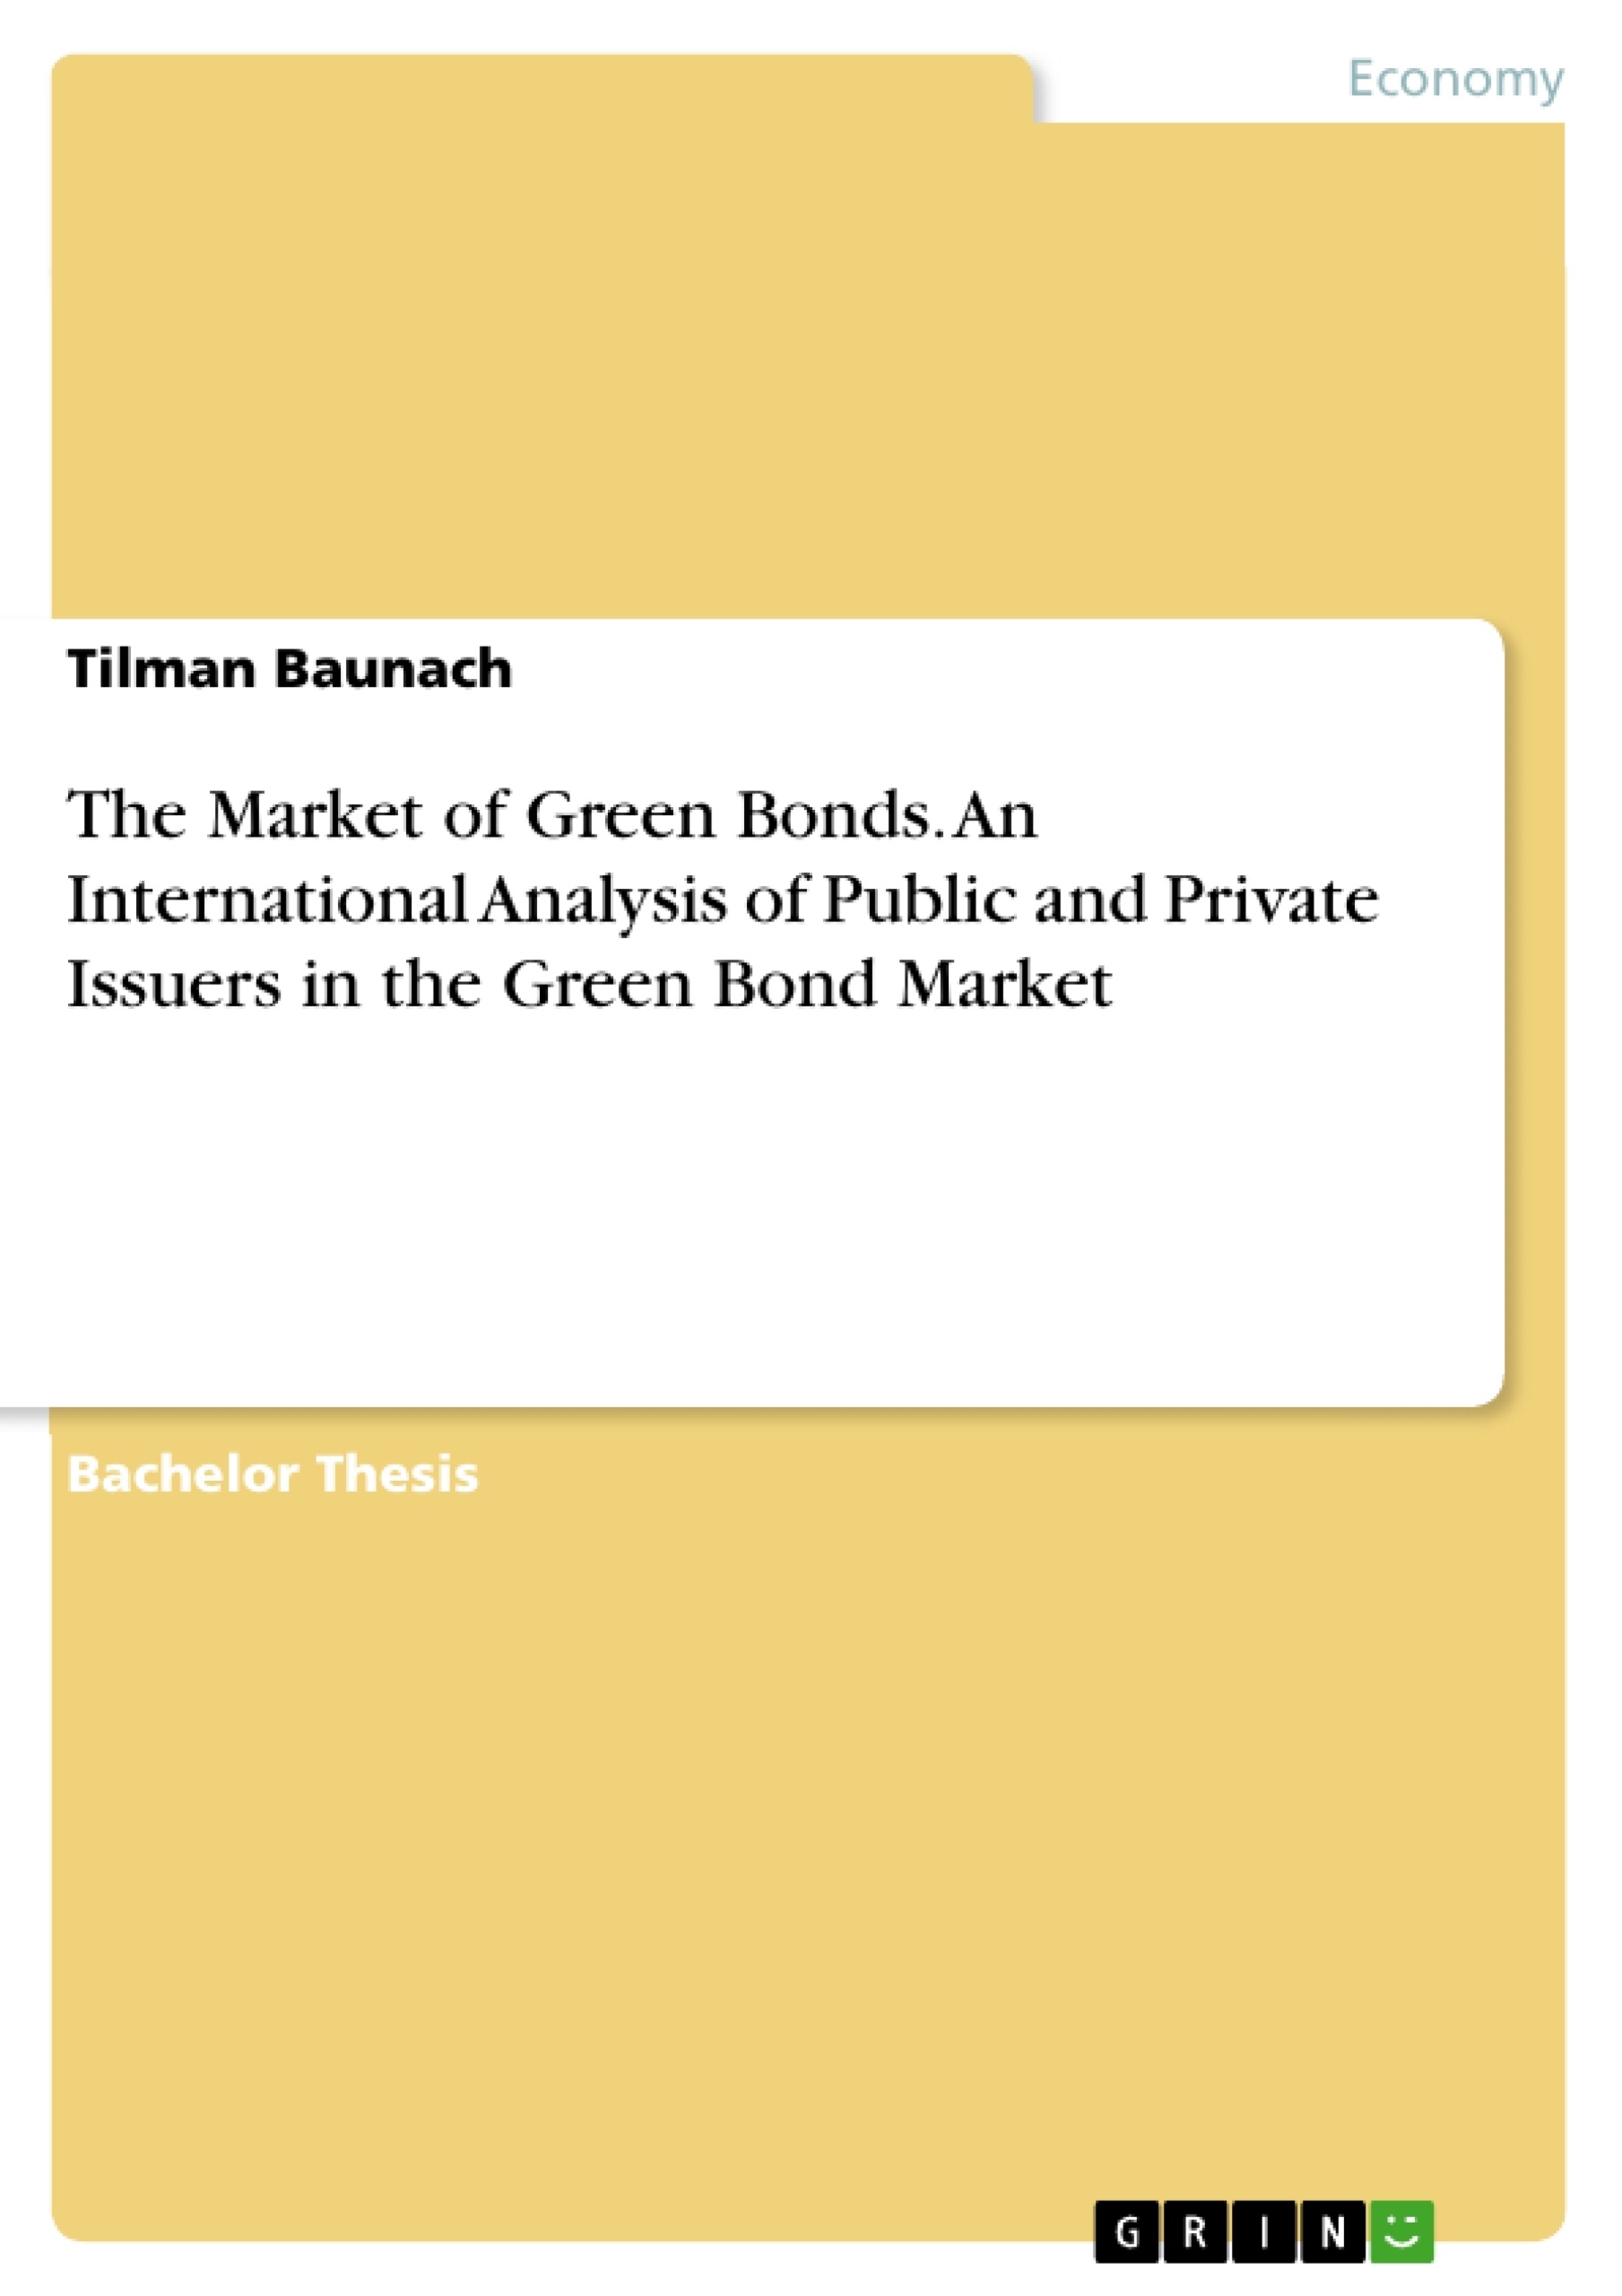 Title: The Market of Green Bonds. An International Analysis of Public and Private Issuers in the Green Bond Market